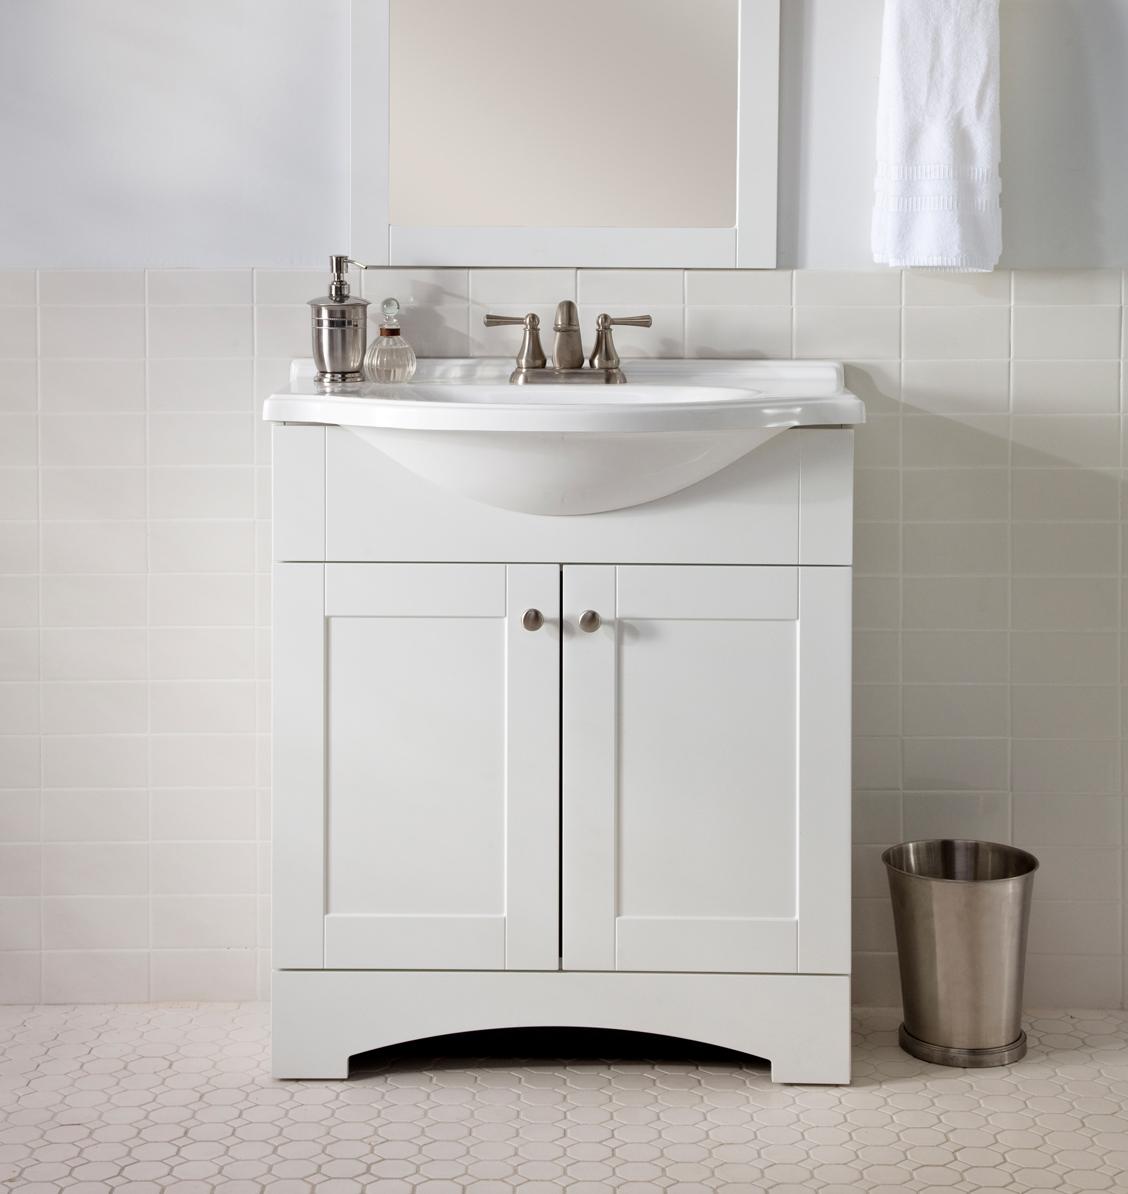 White Bathroom Vanity The Pros And Cons Interior Design